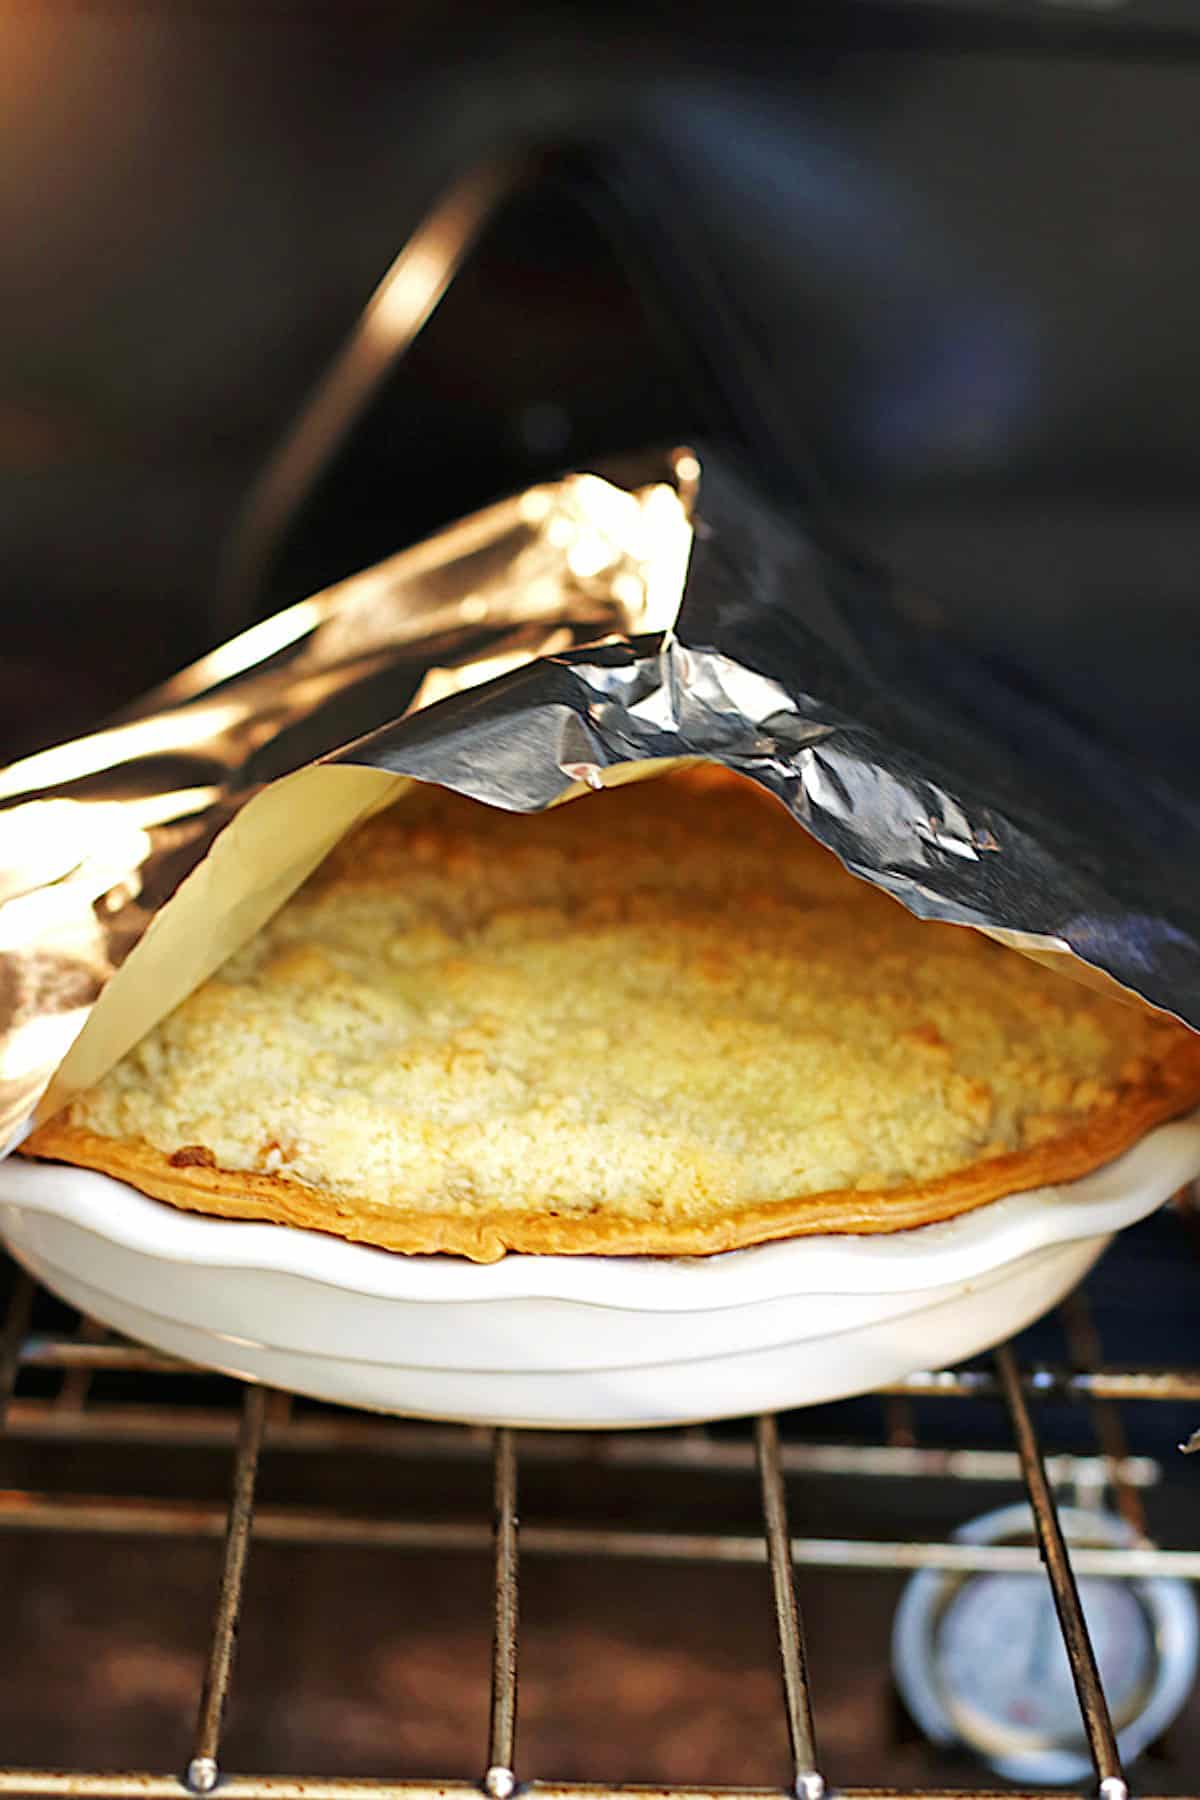 Apple pie in oven with foil tent over the pie